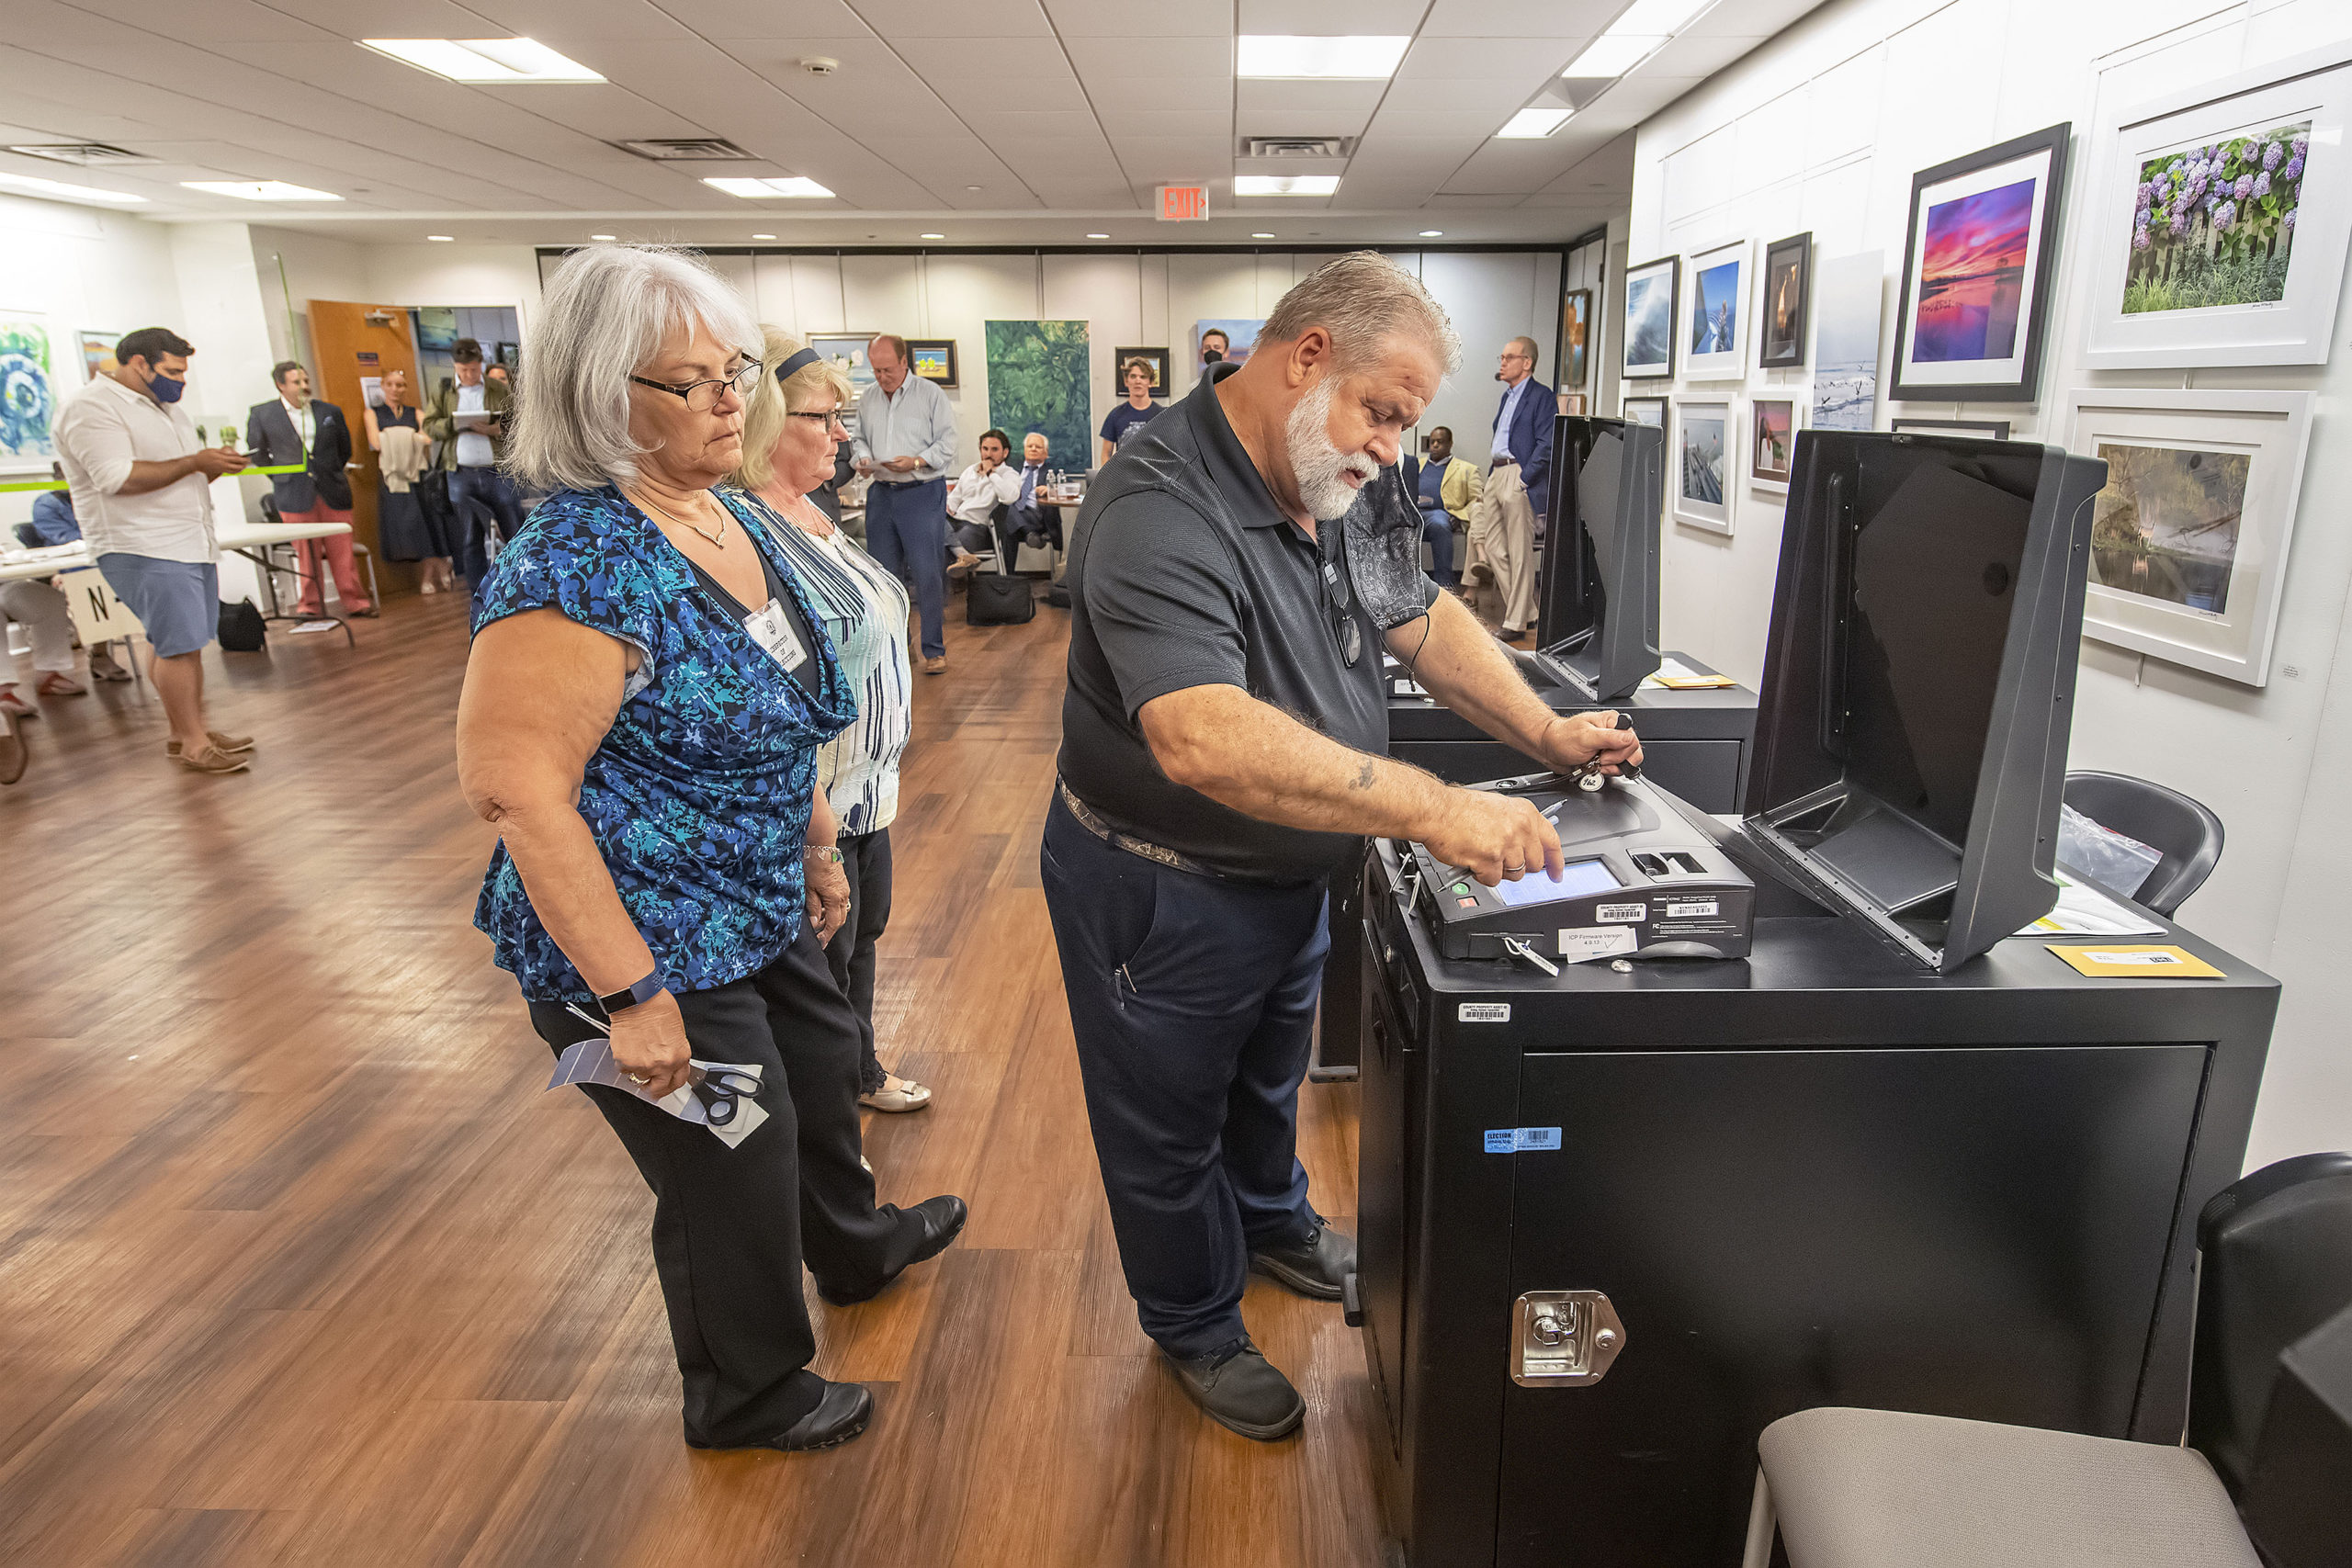 Election Inspectors look on as an election official retrieves the vote count from a voting machine during the 2021 Southampton Village Mayoral election at the Southampton Cultural Center on Friday night. MICHAEL HELLER